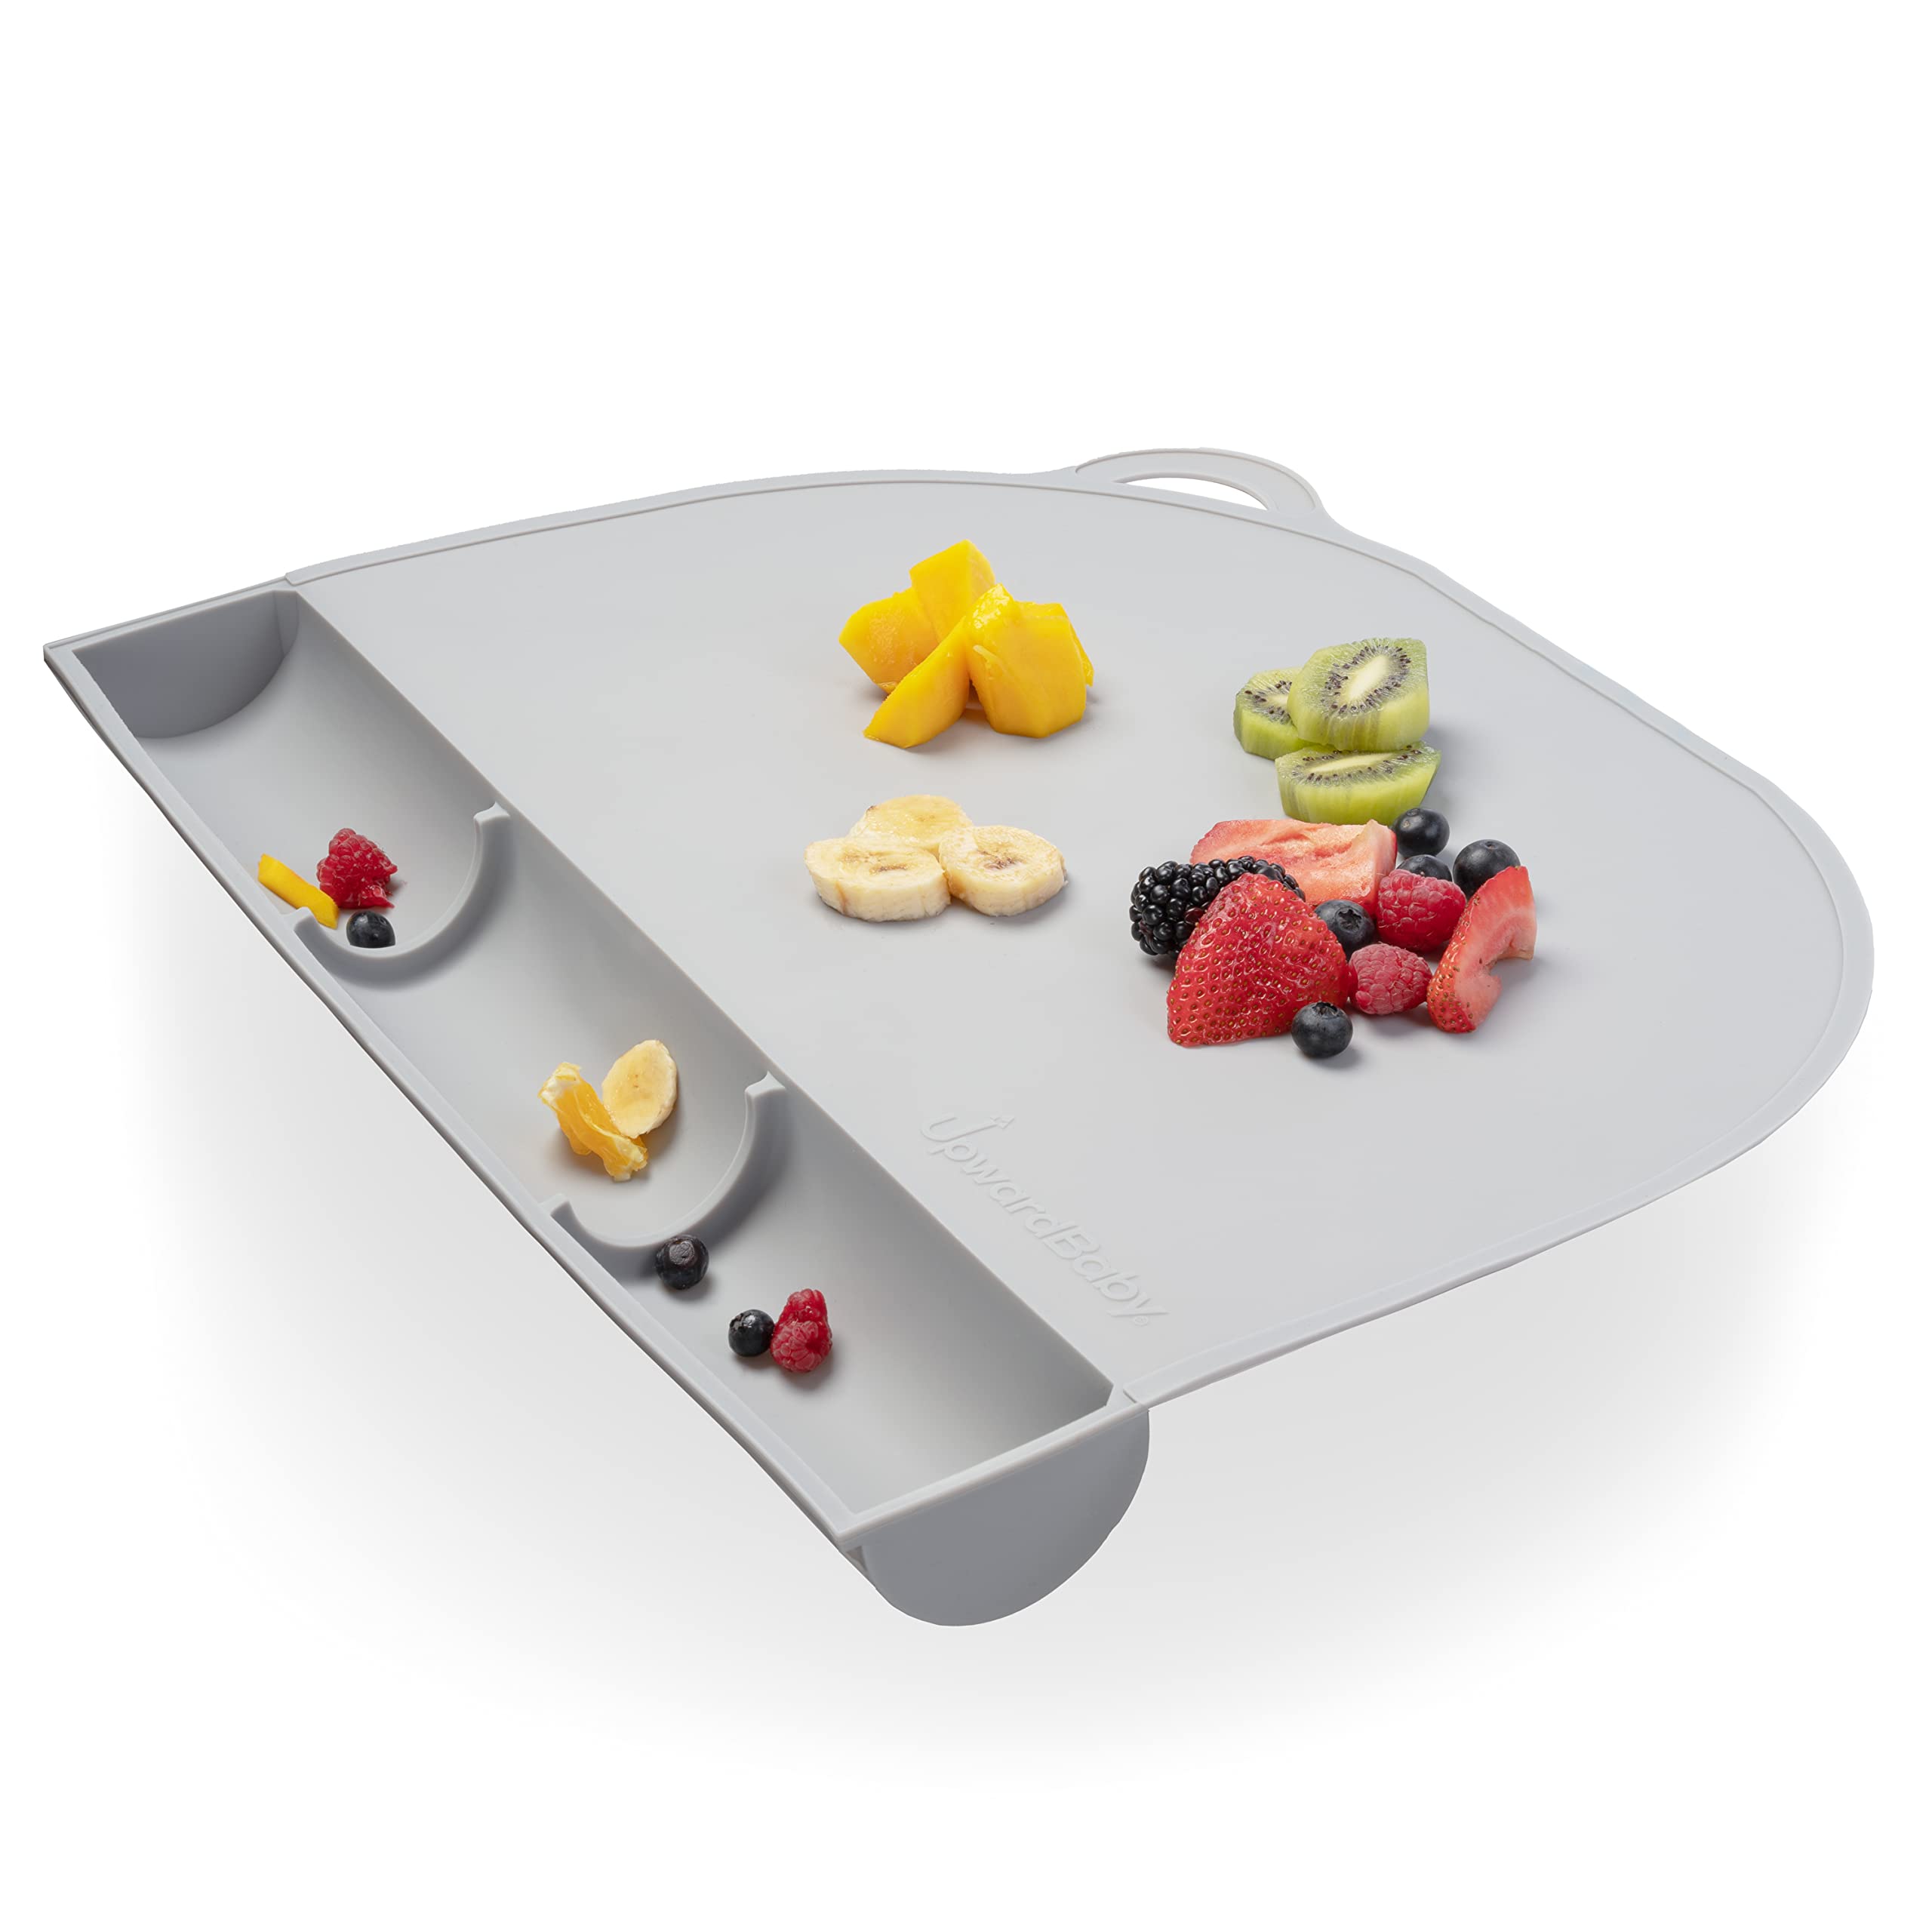 Food Catching Suction Placemat - Gray